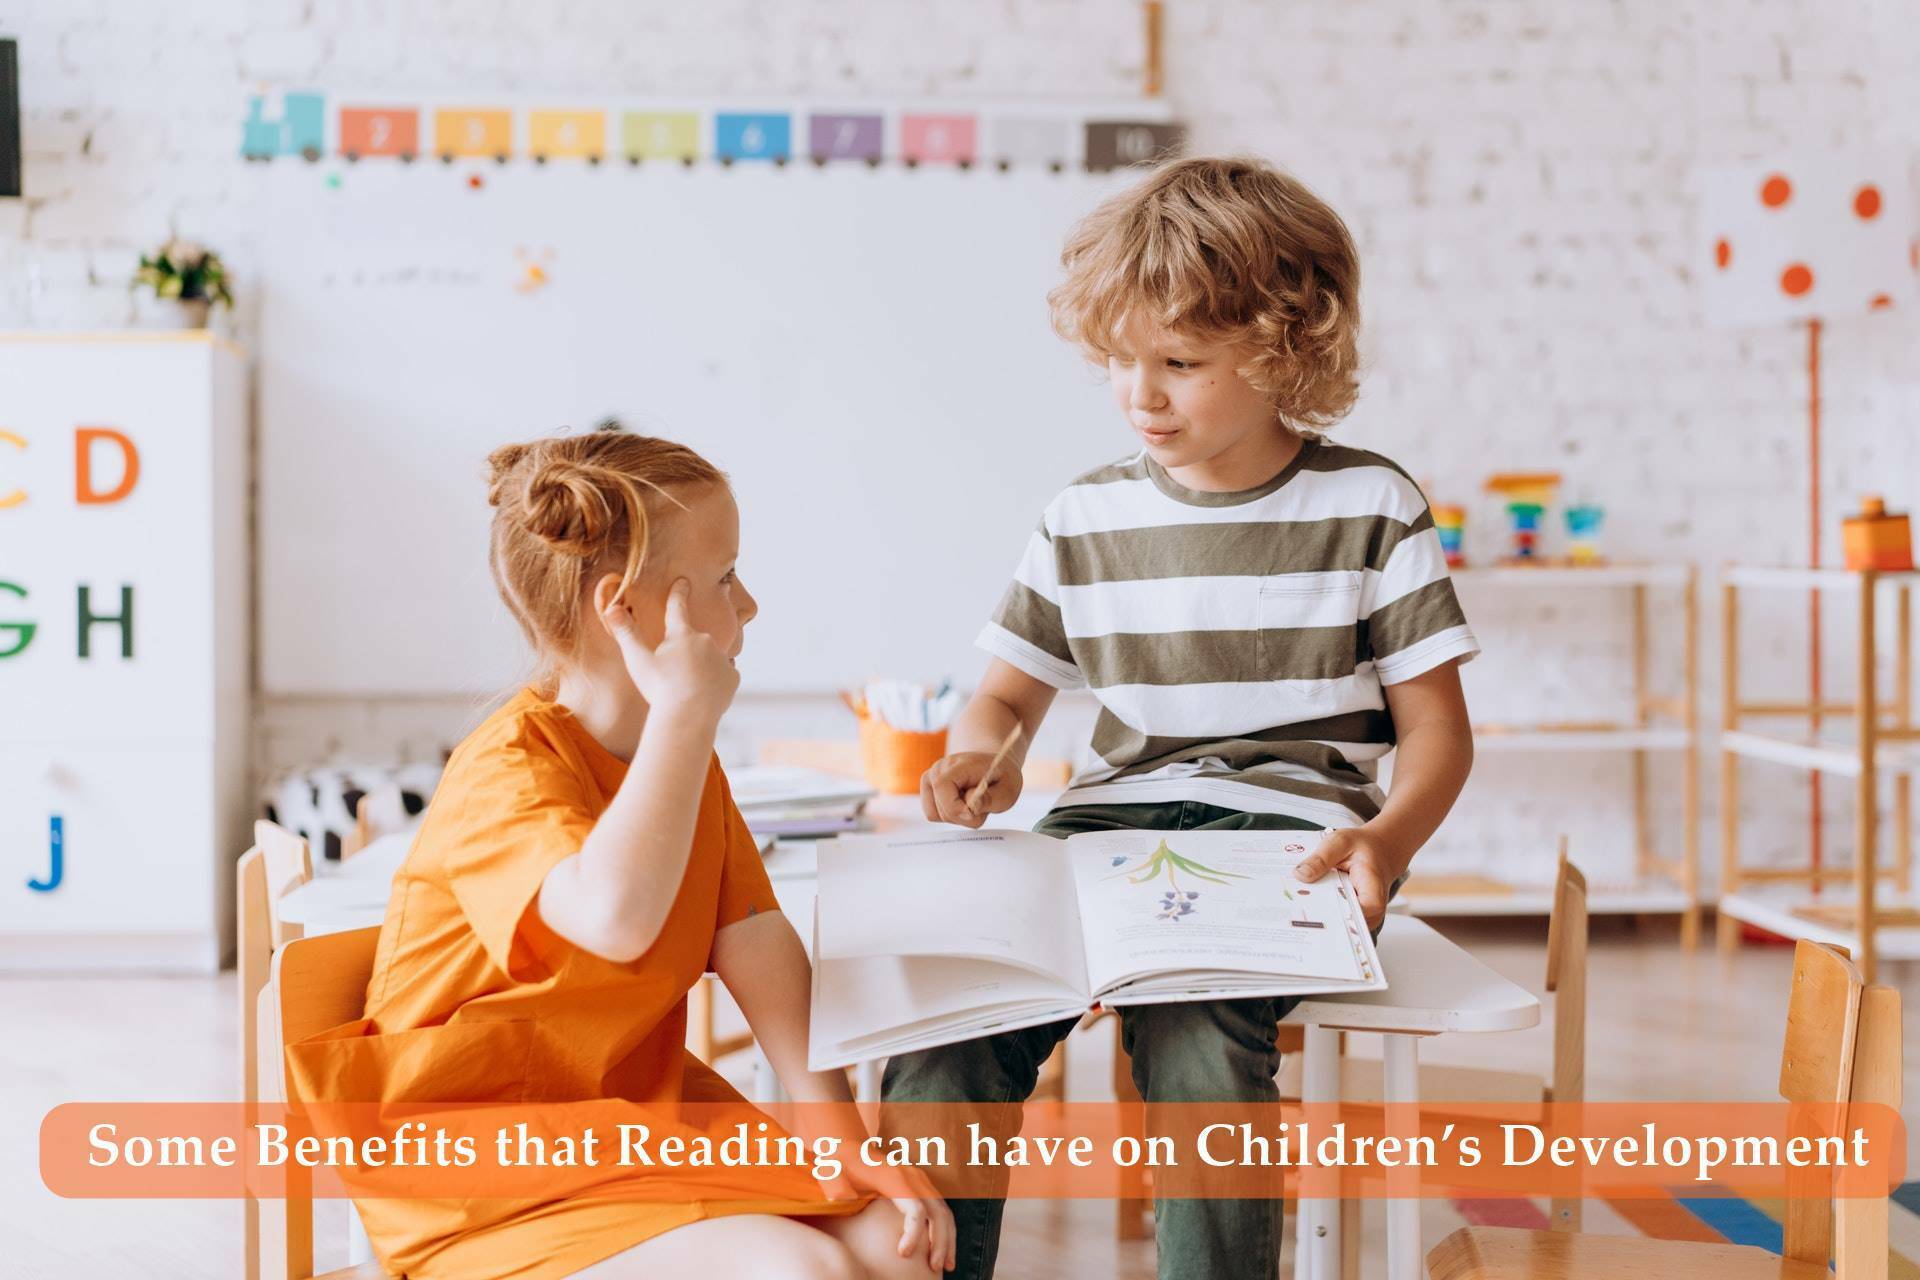 Some Benefits that Reading can have on Children’s Development